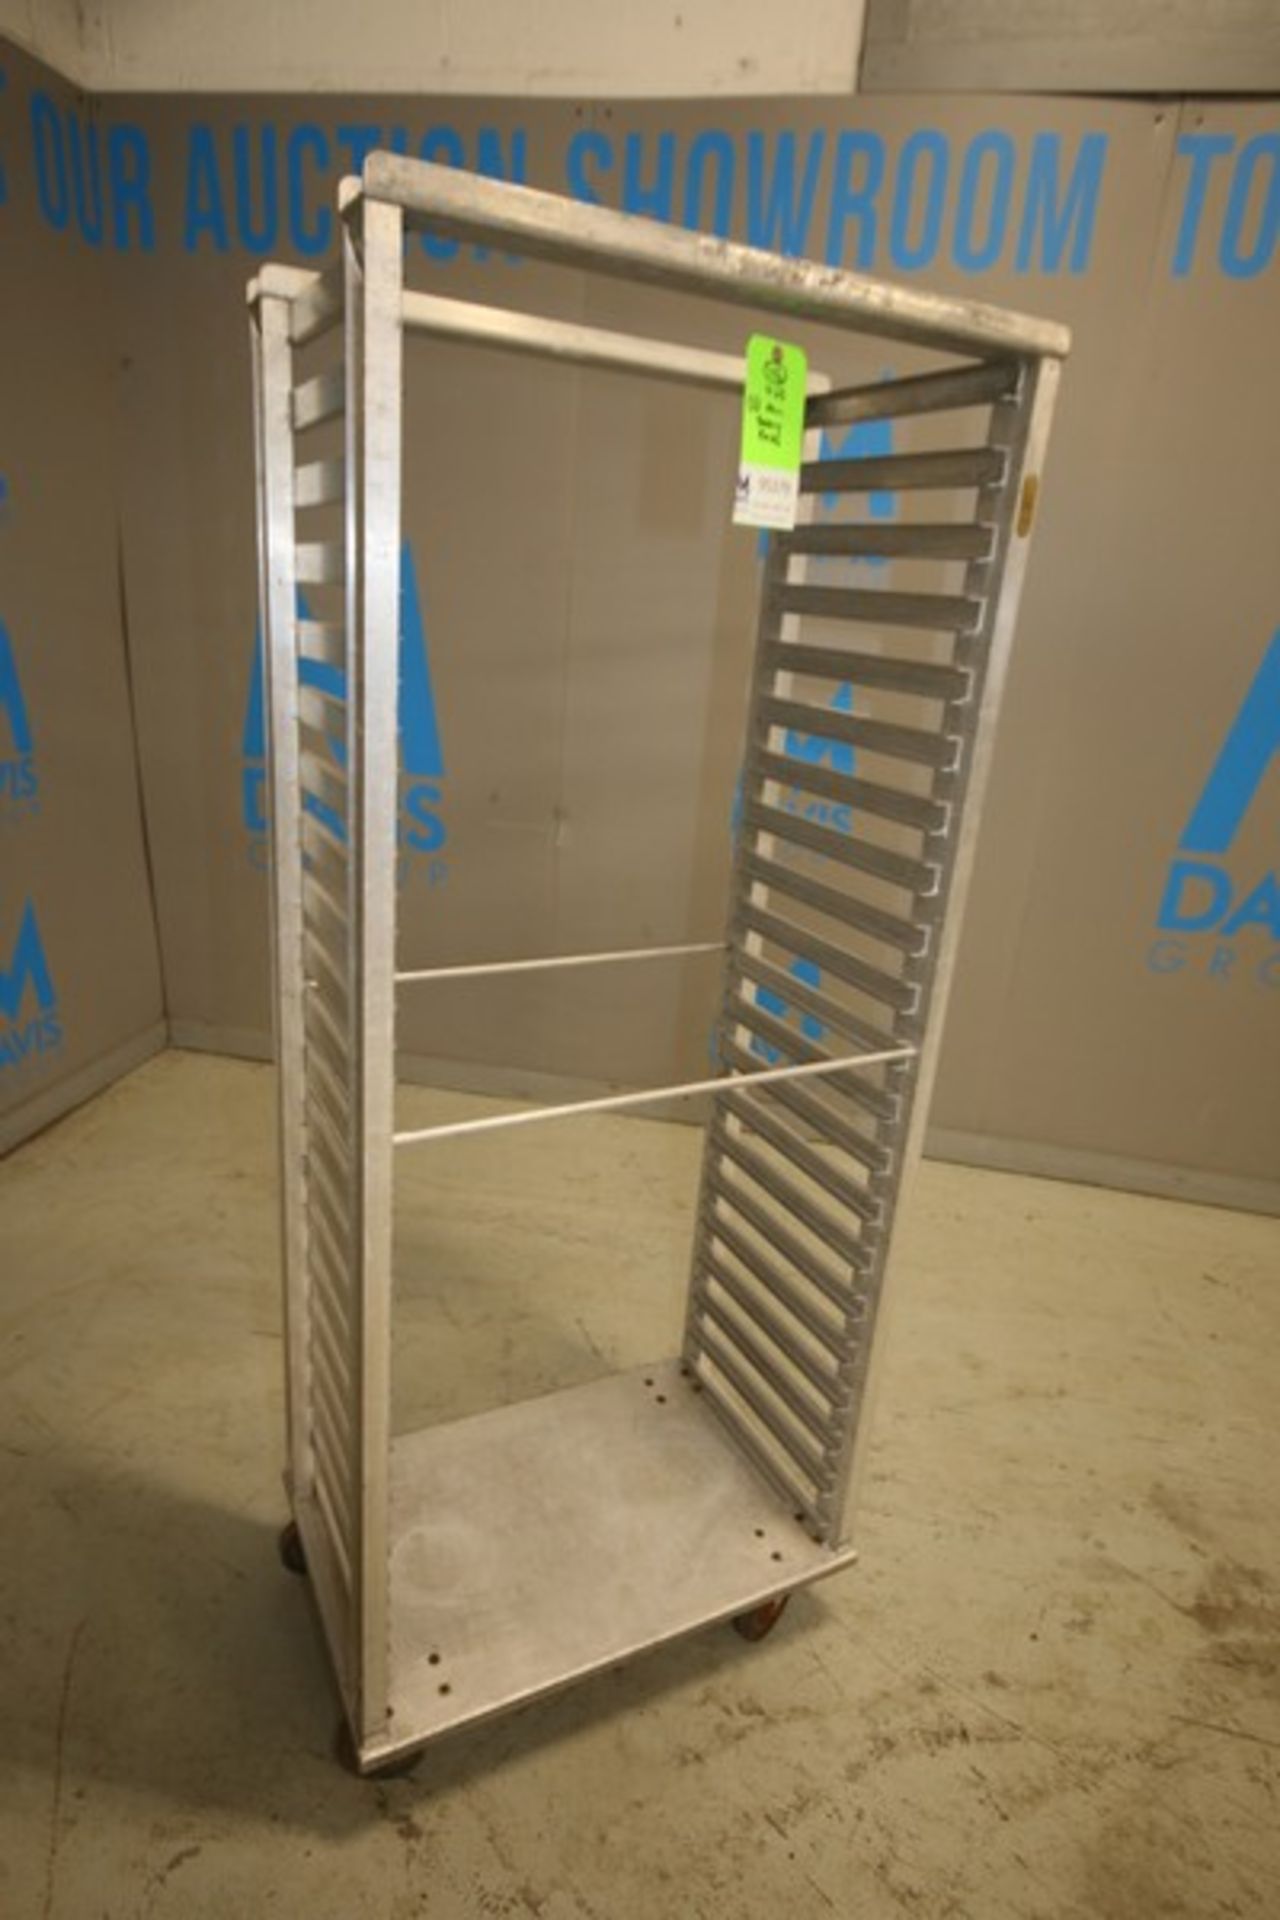 Lot of (5) Assorted Aluminum Bakery Racks, 28" W x 18" D x 69" H, Try Size - 26" x 18" (INV#95379)(